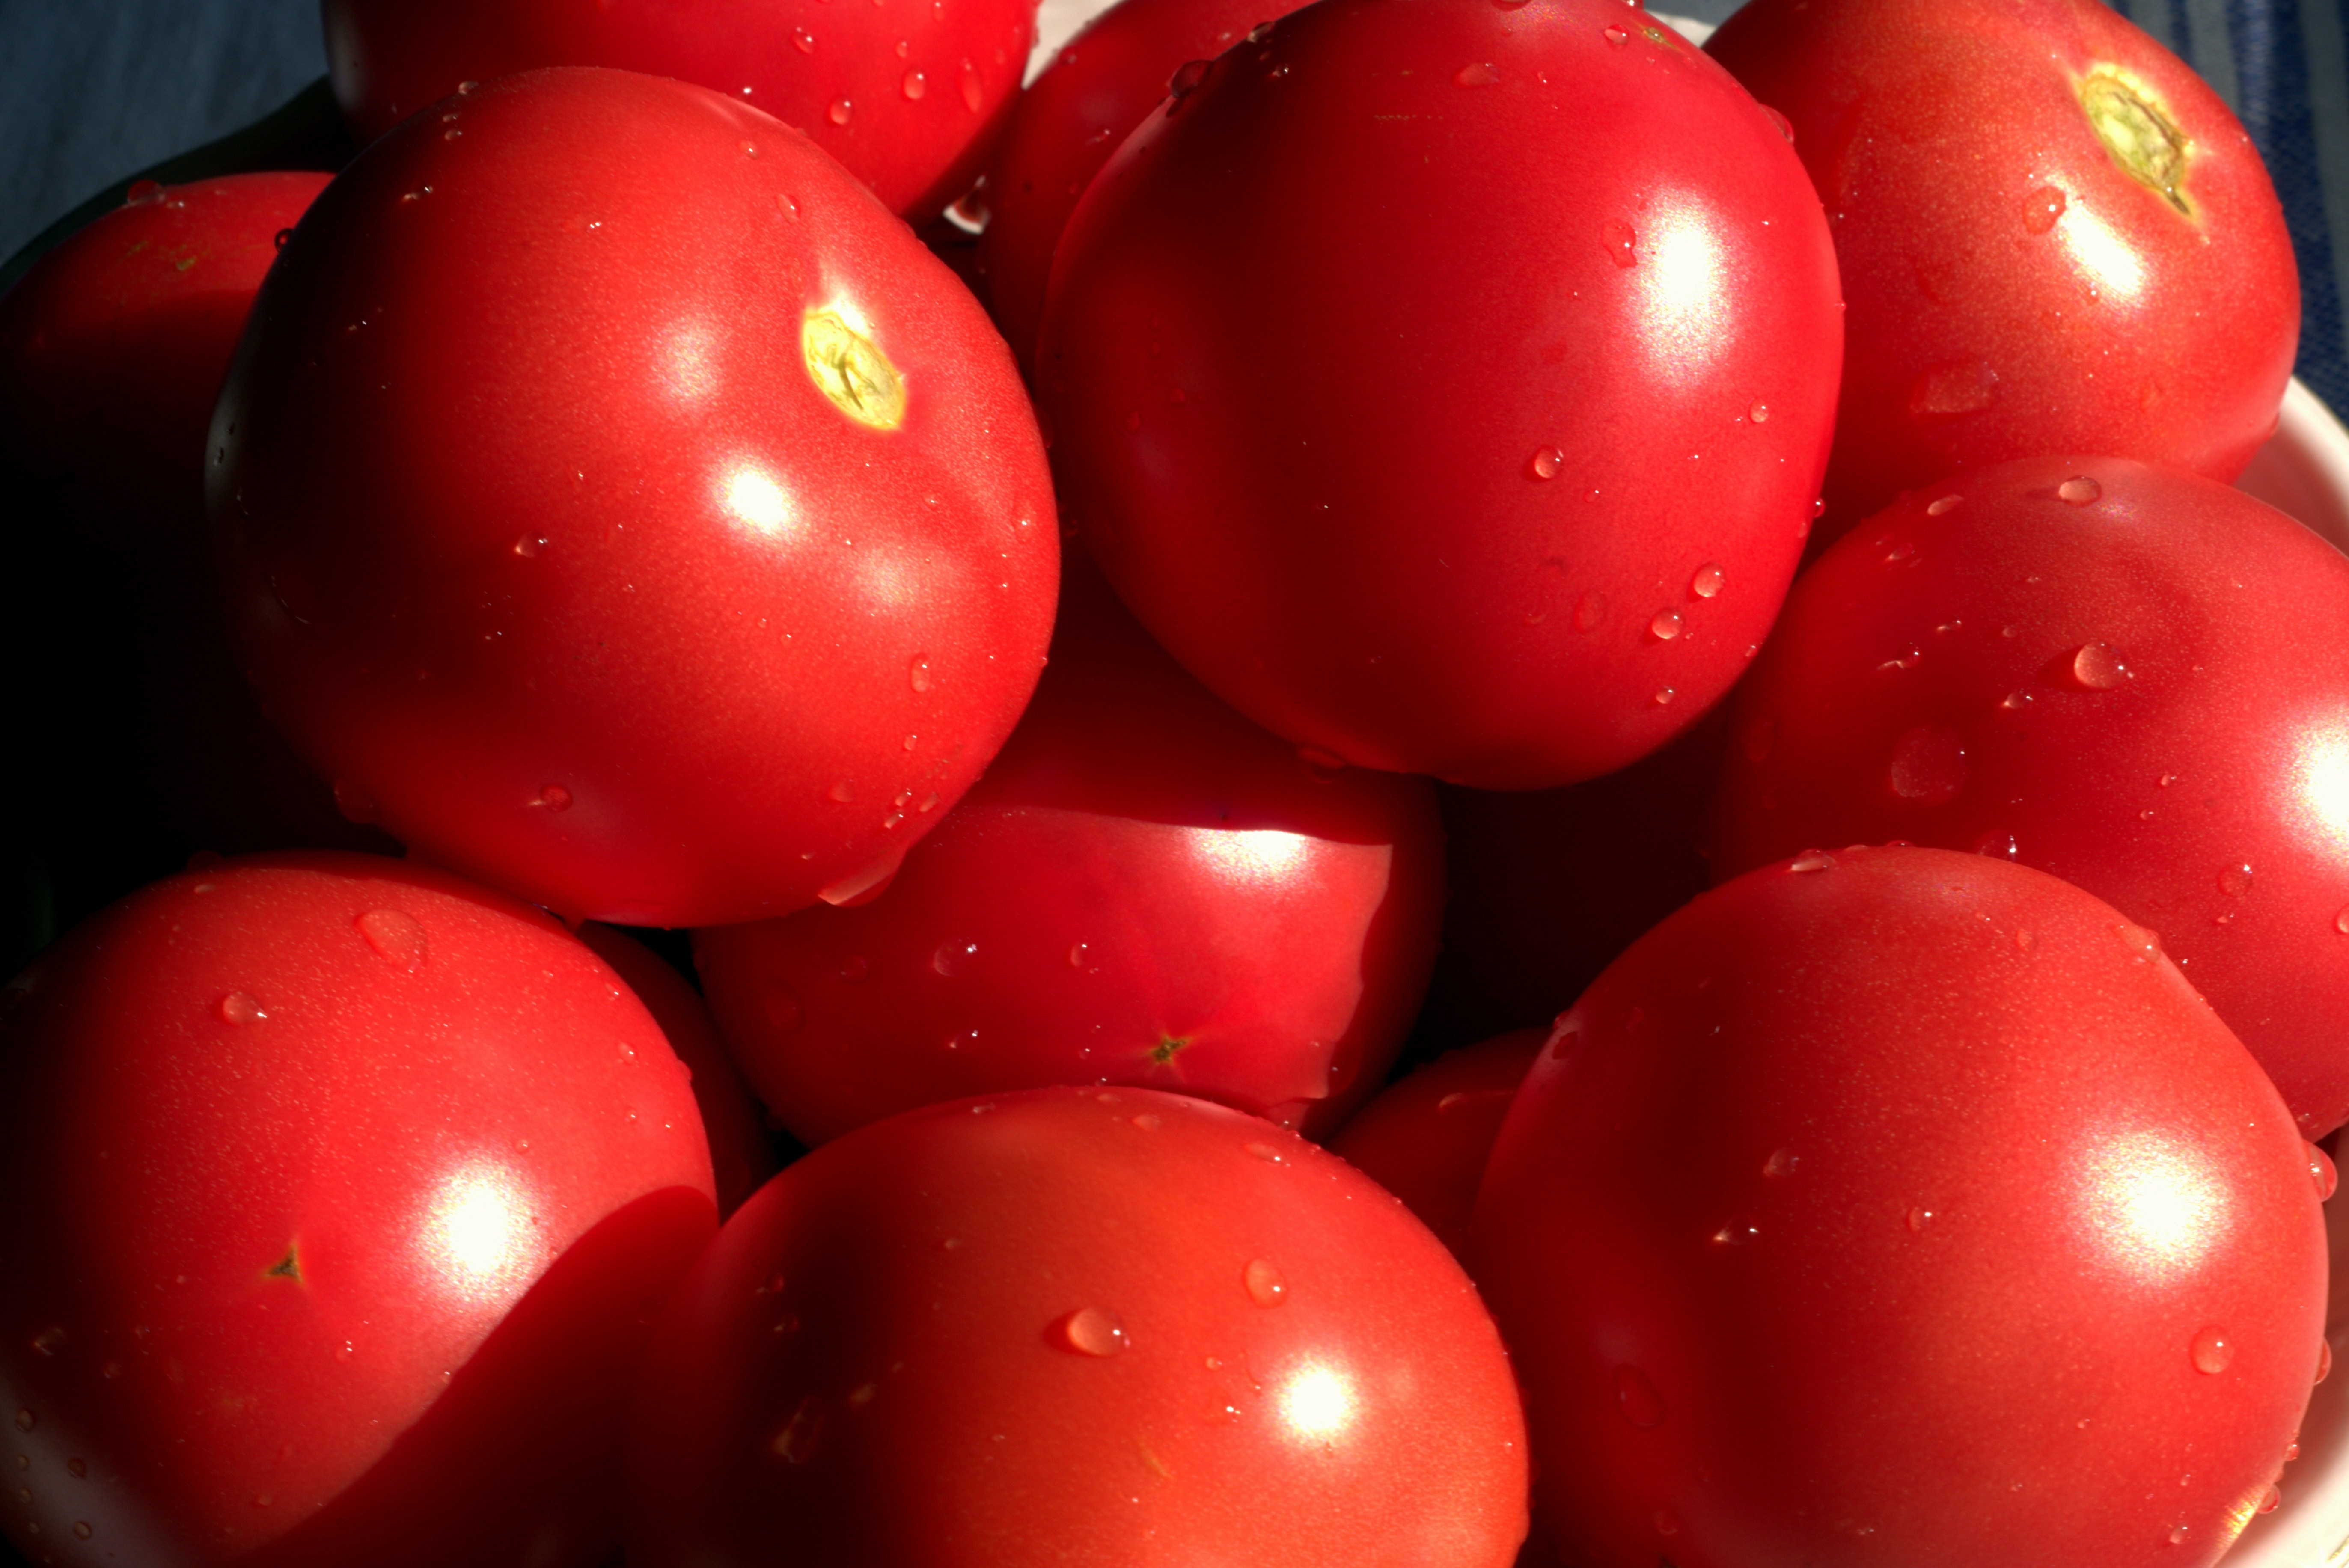 Juicy, Mature, Healthy, Red, Tomatoes, red, food and drink